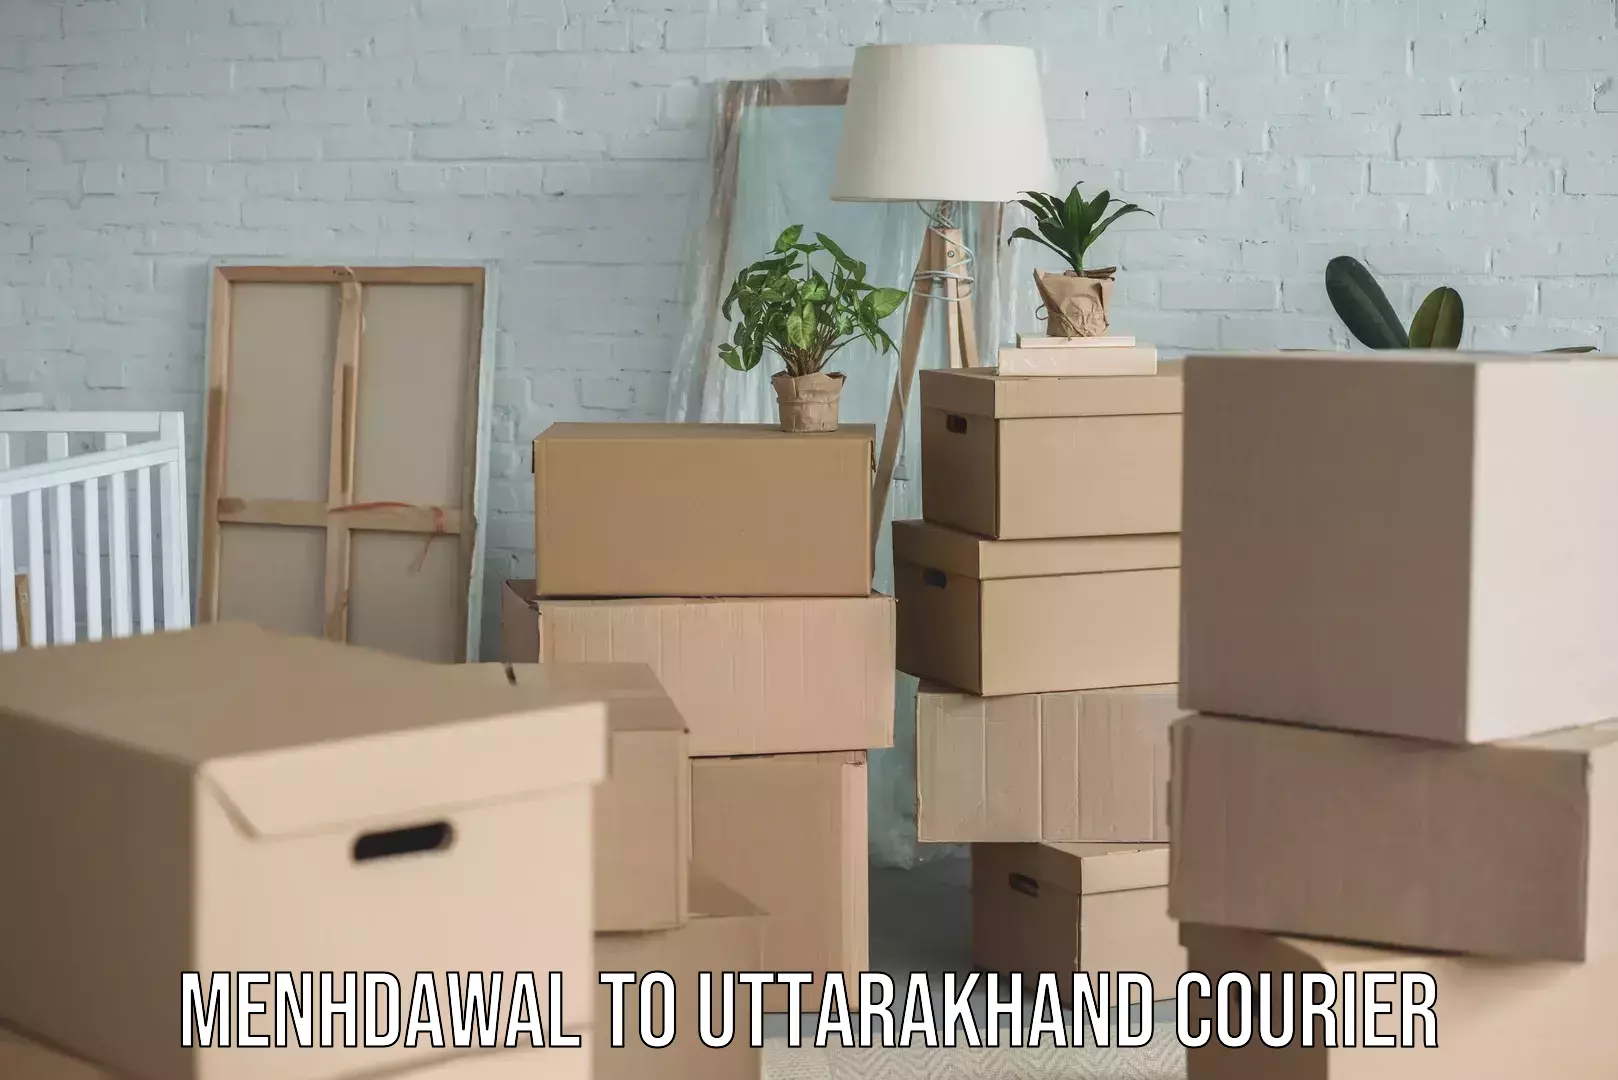 Nationwide moving services Menhdawal to Uttarakhand